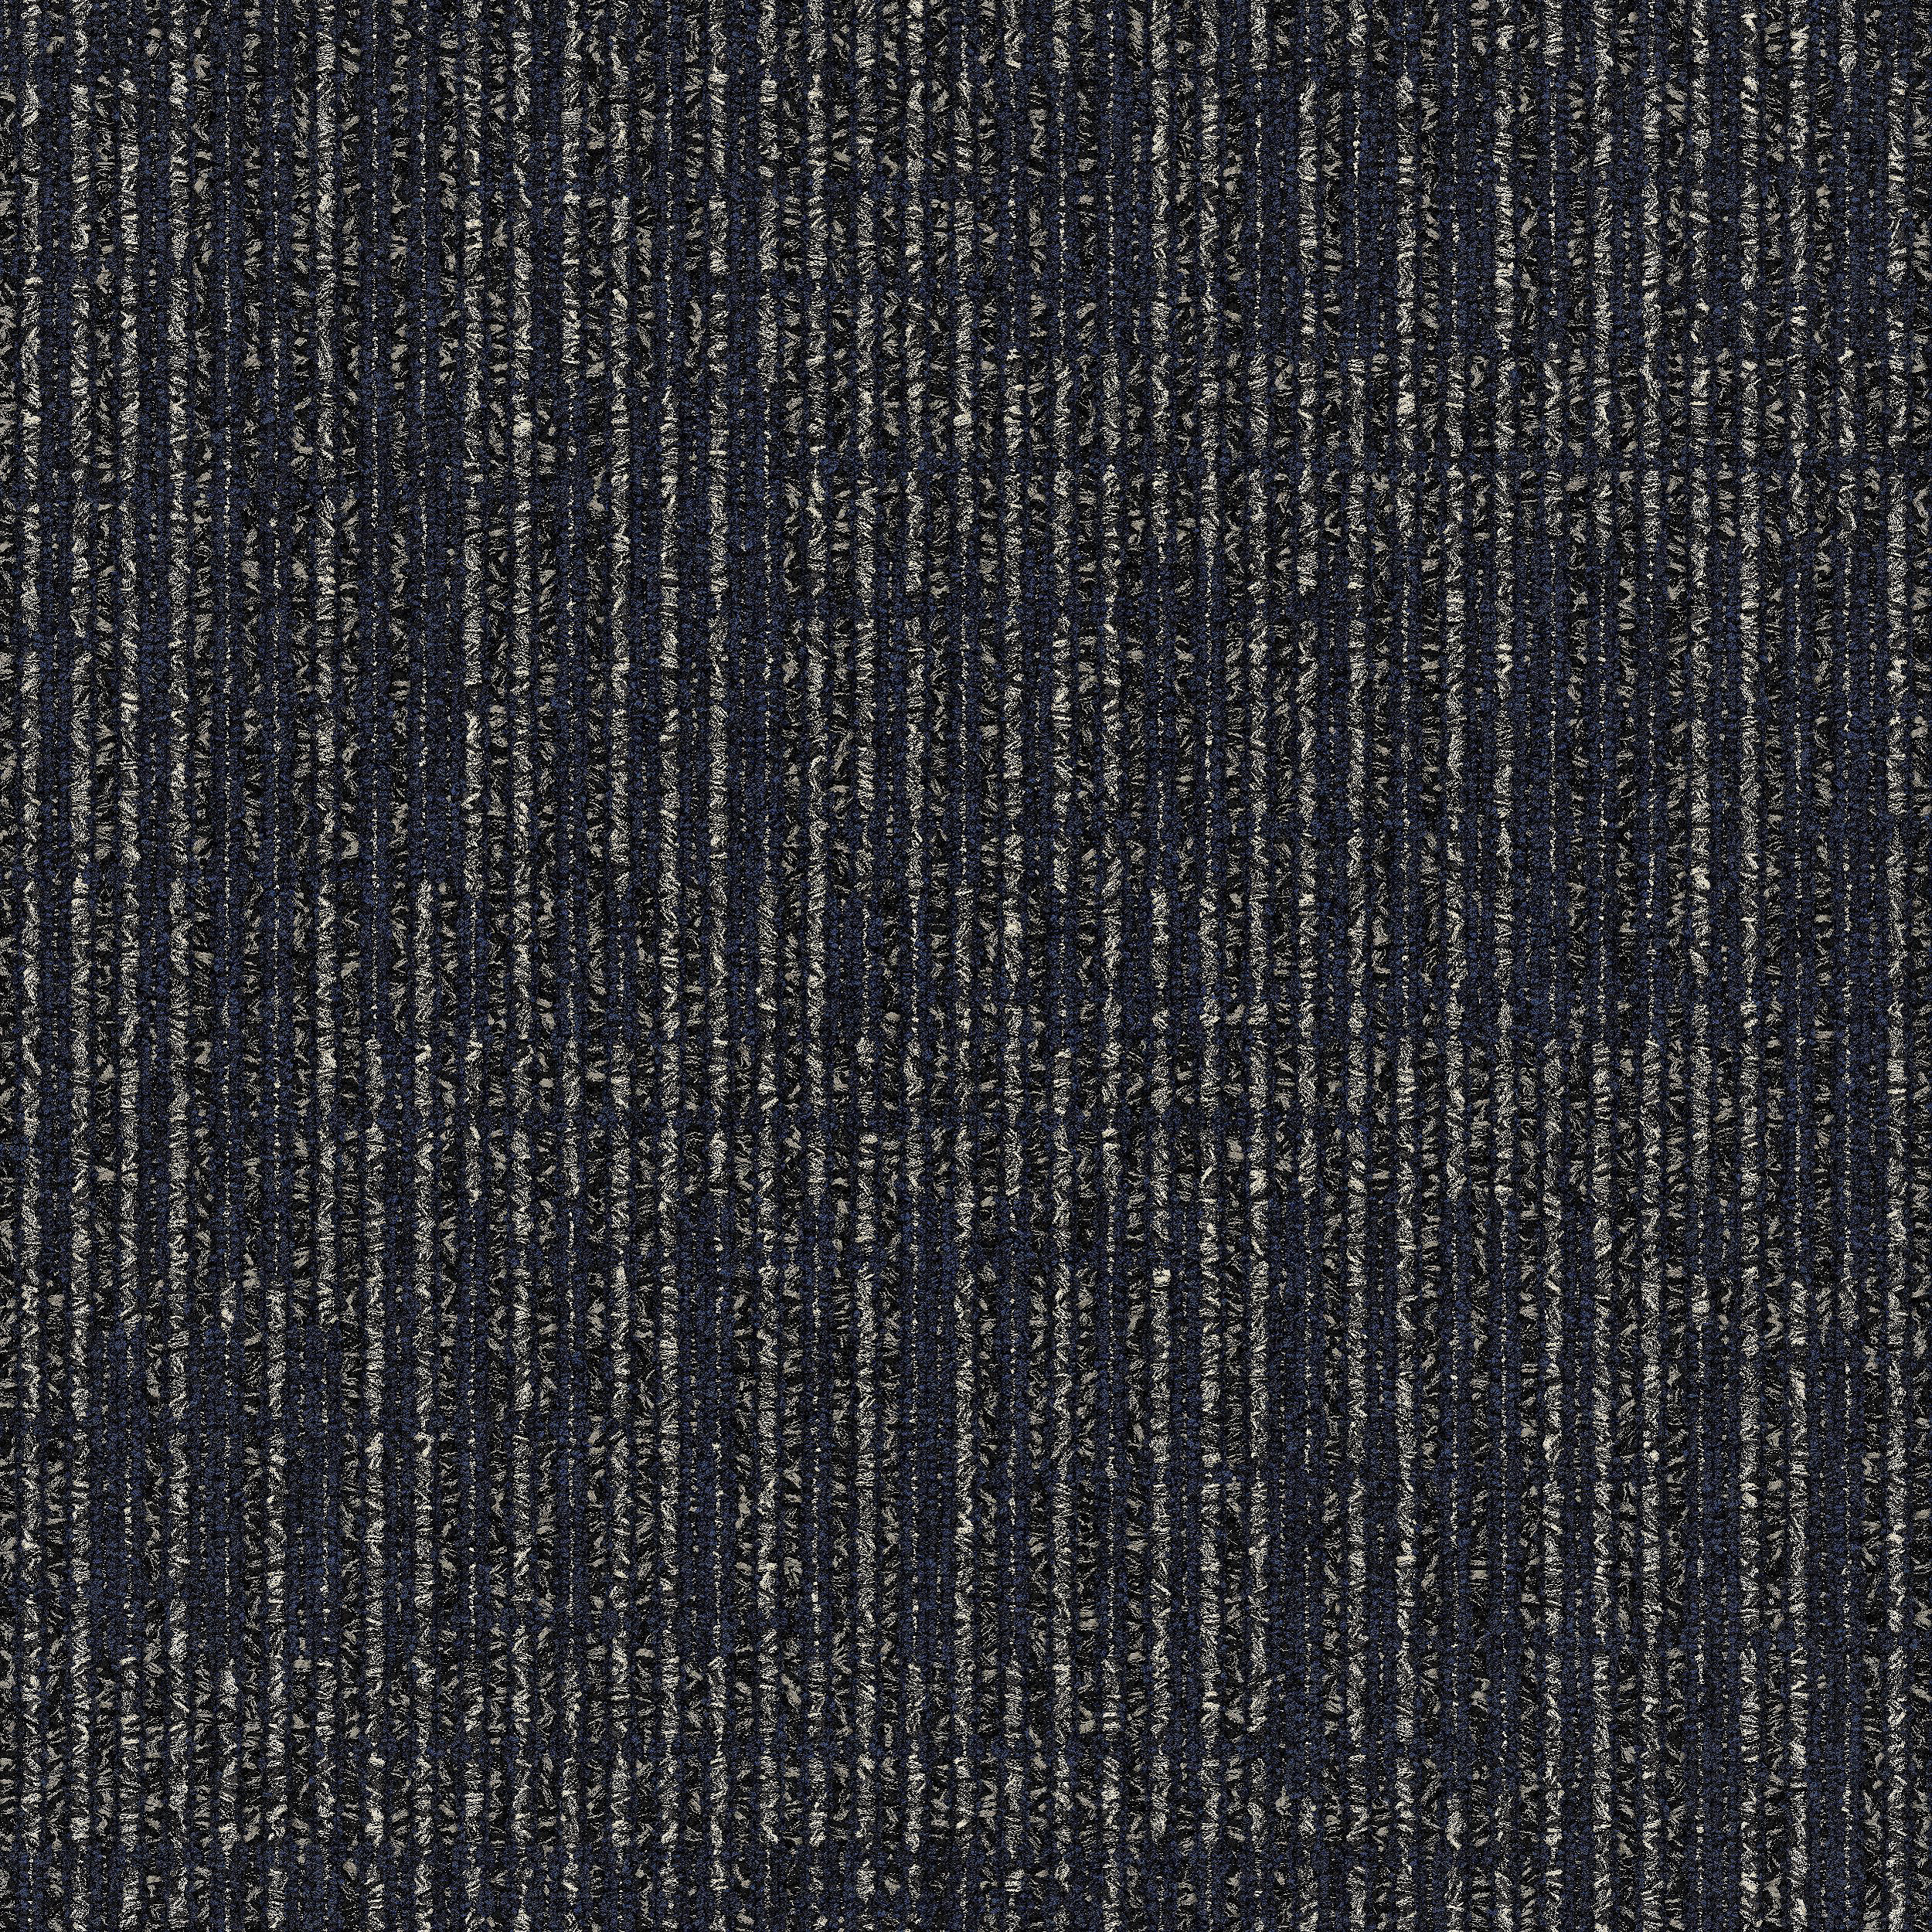 SR899: Step Repeat Collection Carpet Tile by Interface